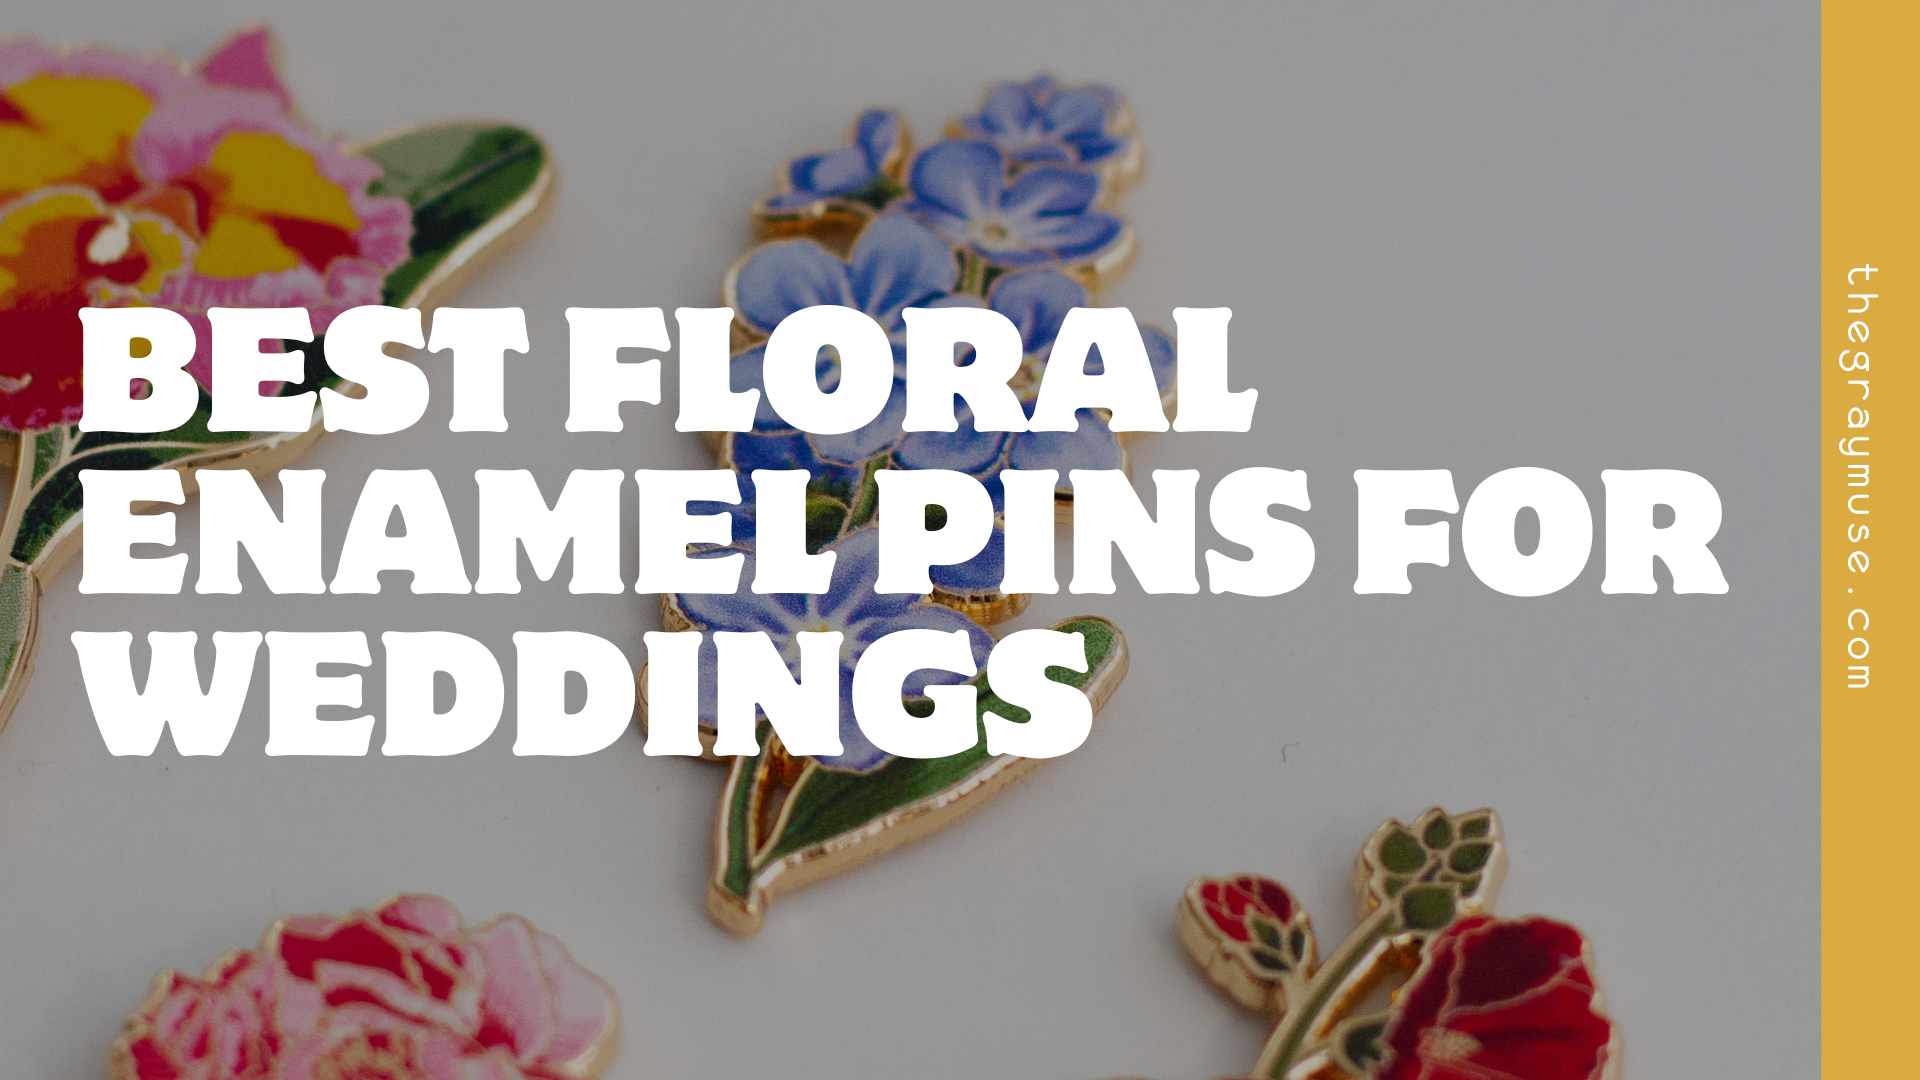 The Best Floral Enamel Pins for Weddings